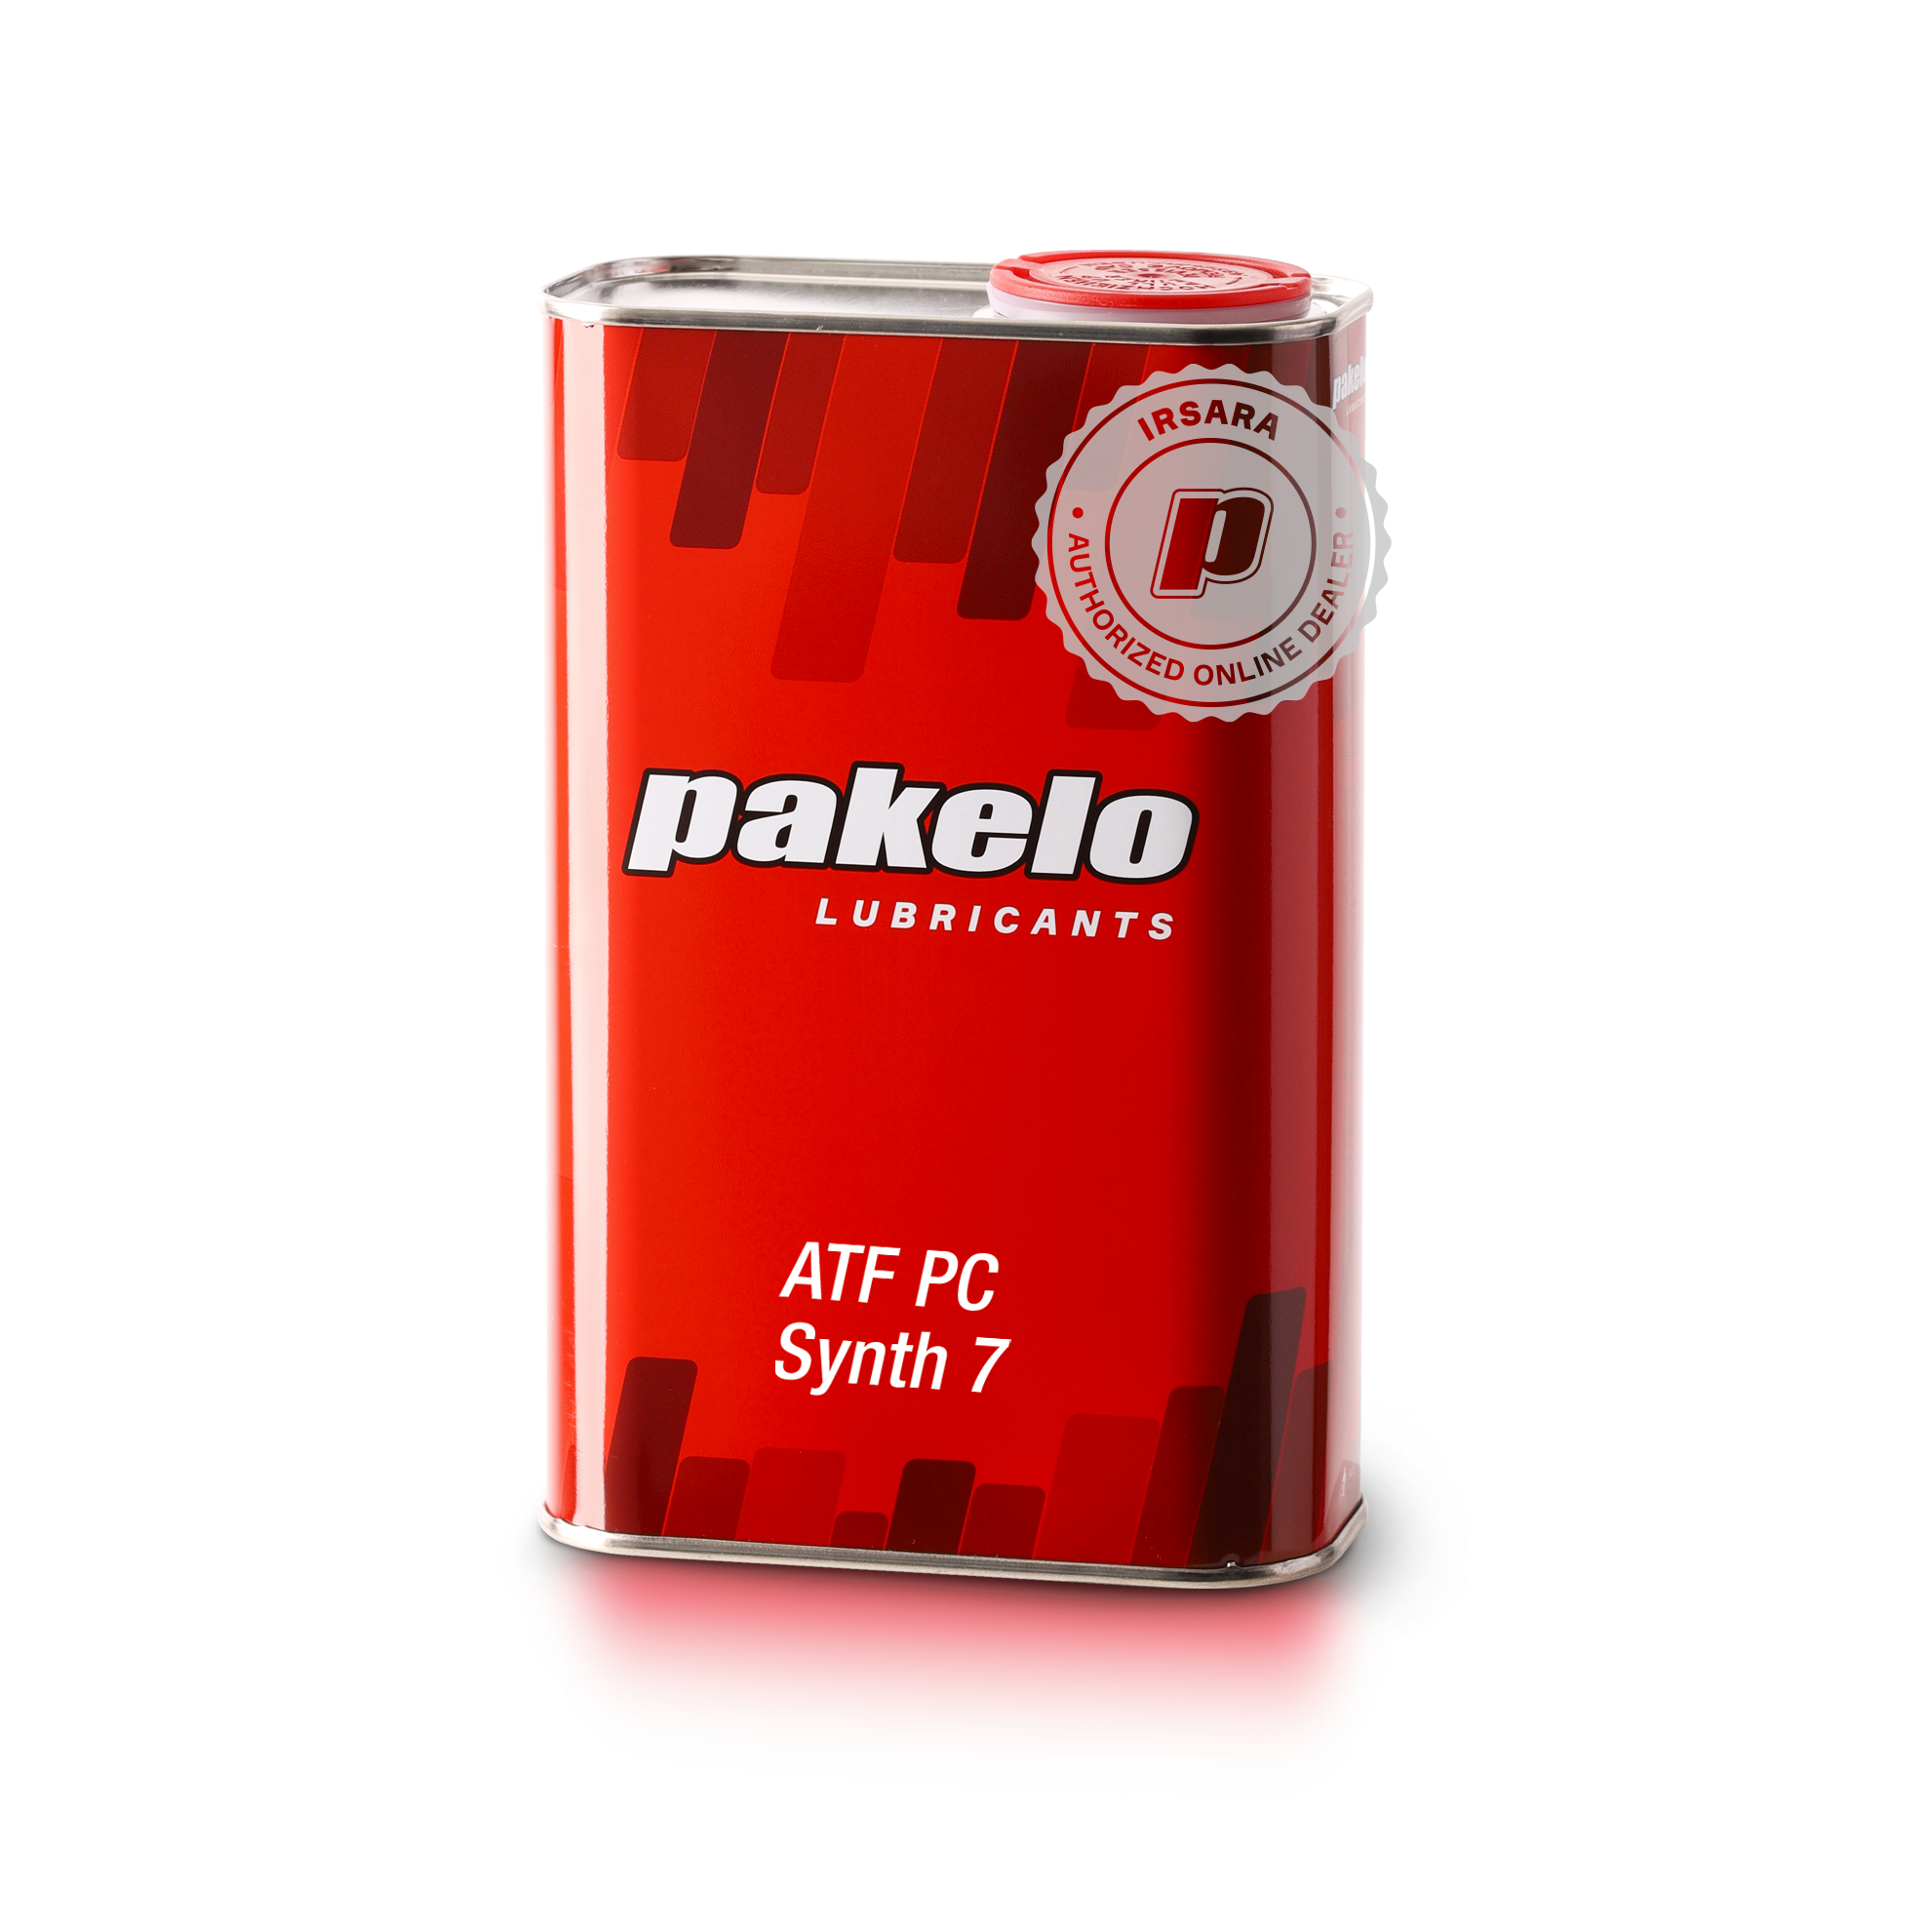 PAKELO ATF PC SYNTH 7 (1 L)